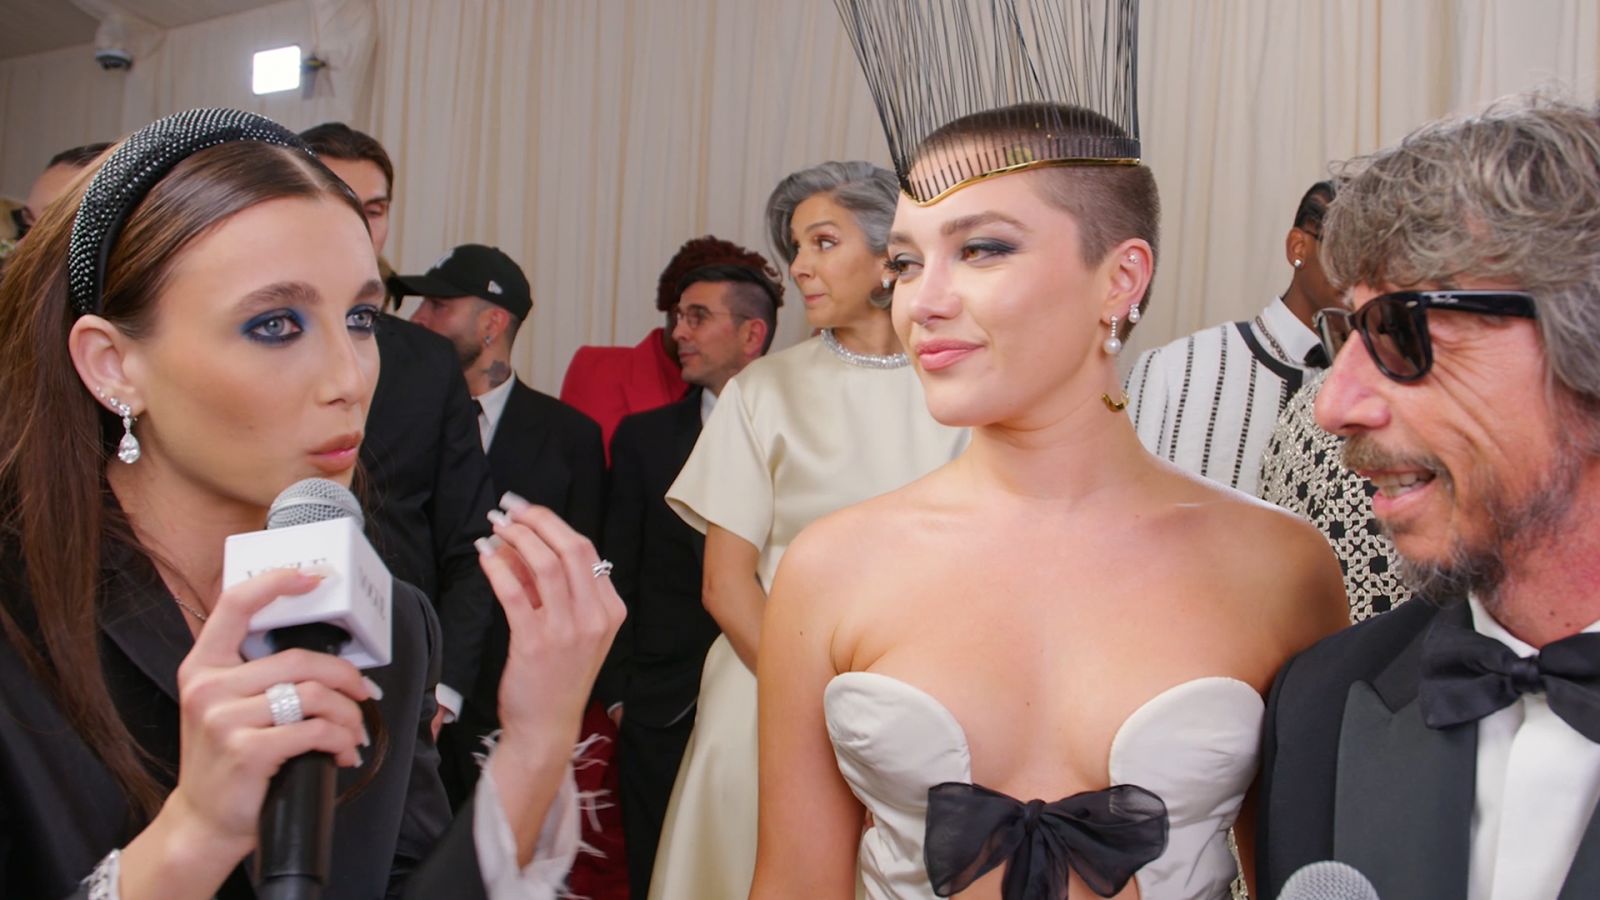 Florence Pugh: Why the Met Gala is "Ultimate Adult Dress Up"